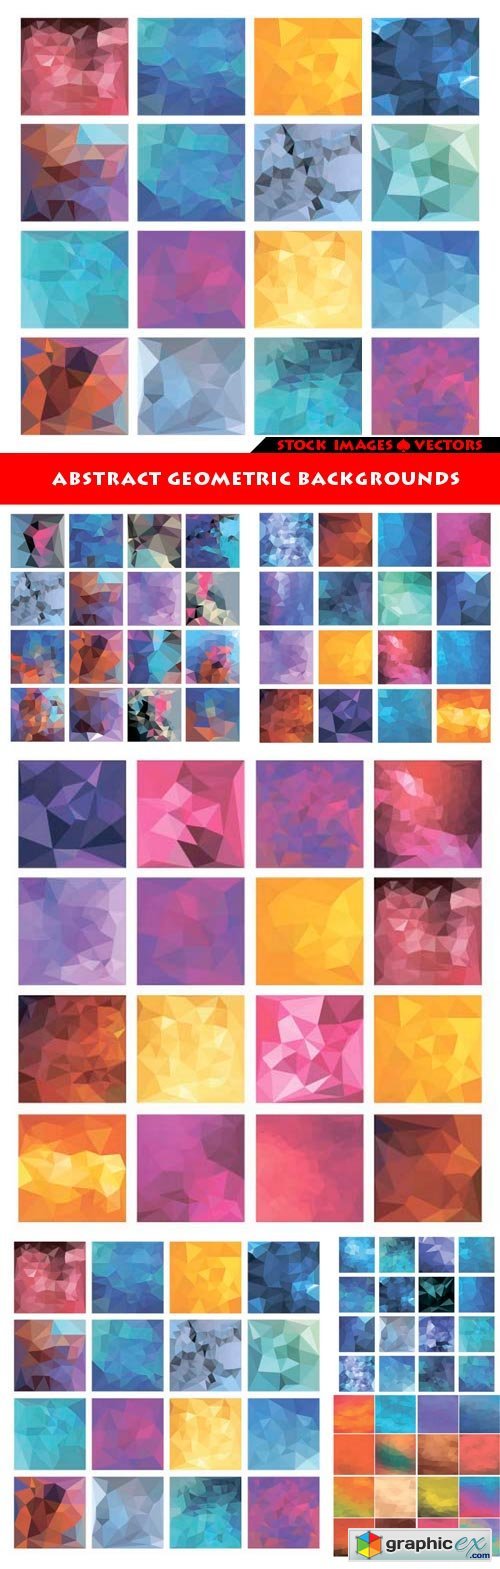 Abstract geometric backgrounds 6x EPS